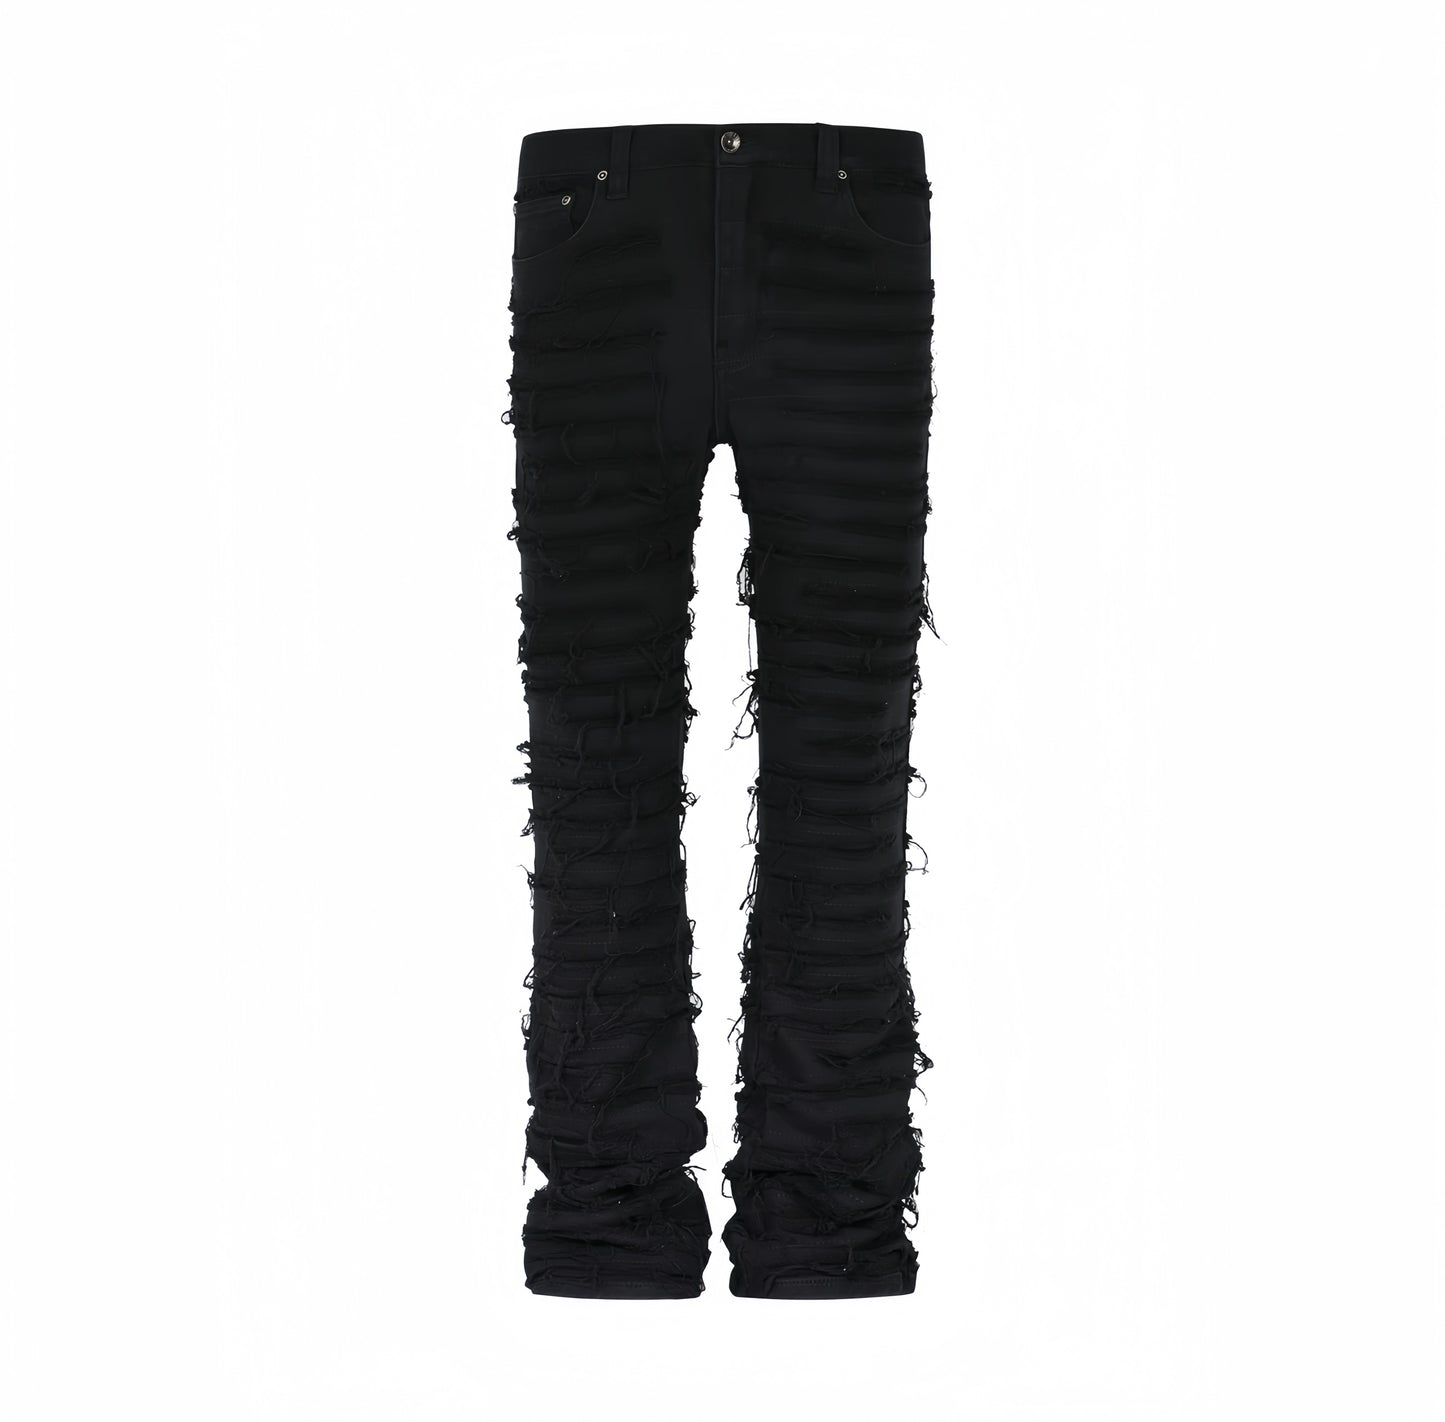 R69 THE NEEDLE IN THE WRAP JEANS PANTS